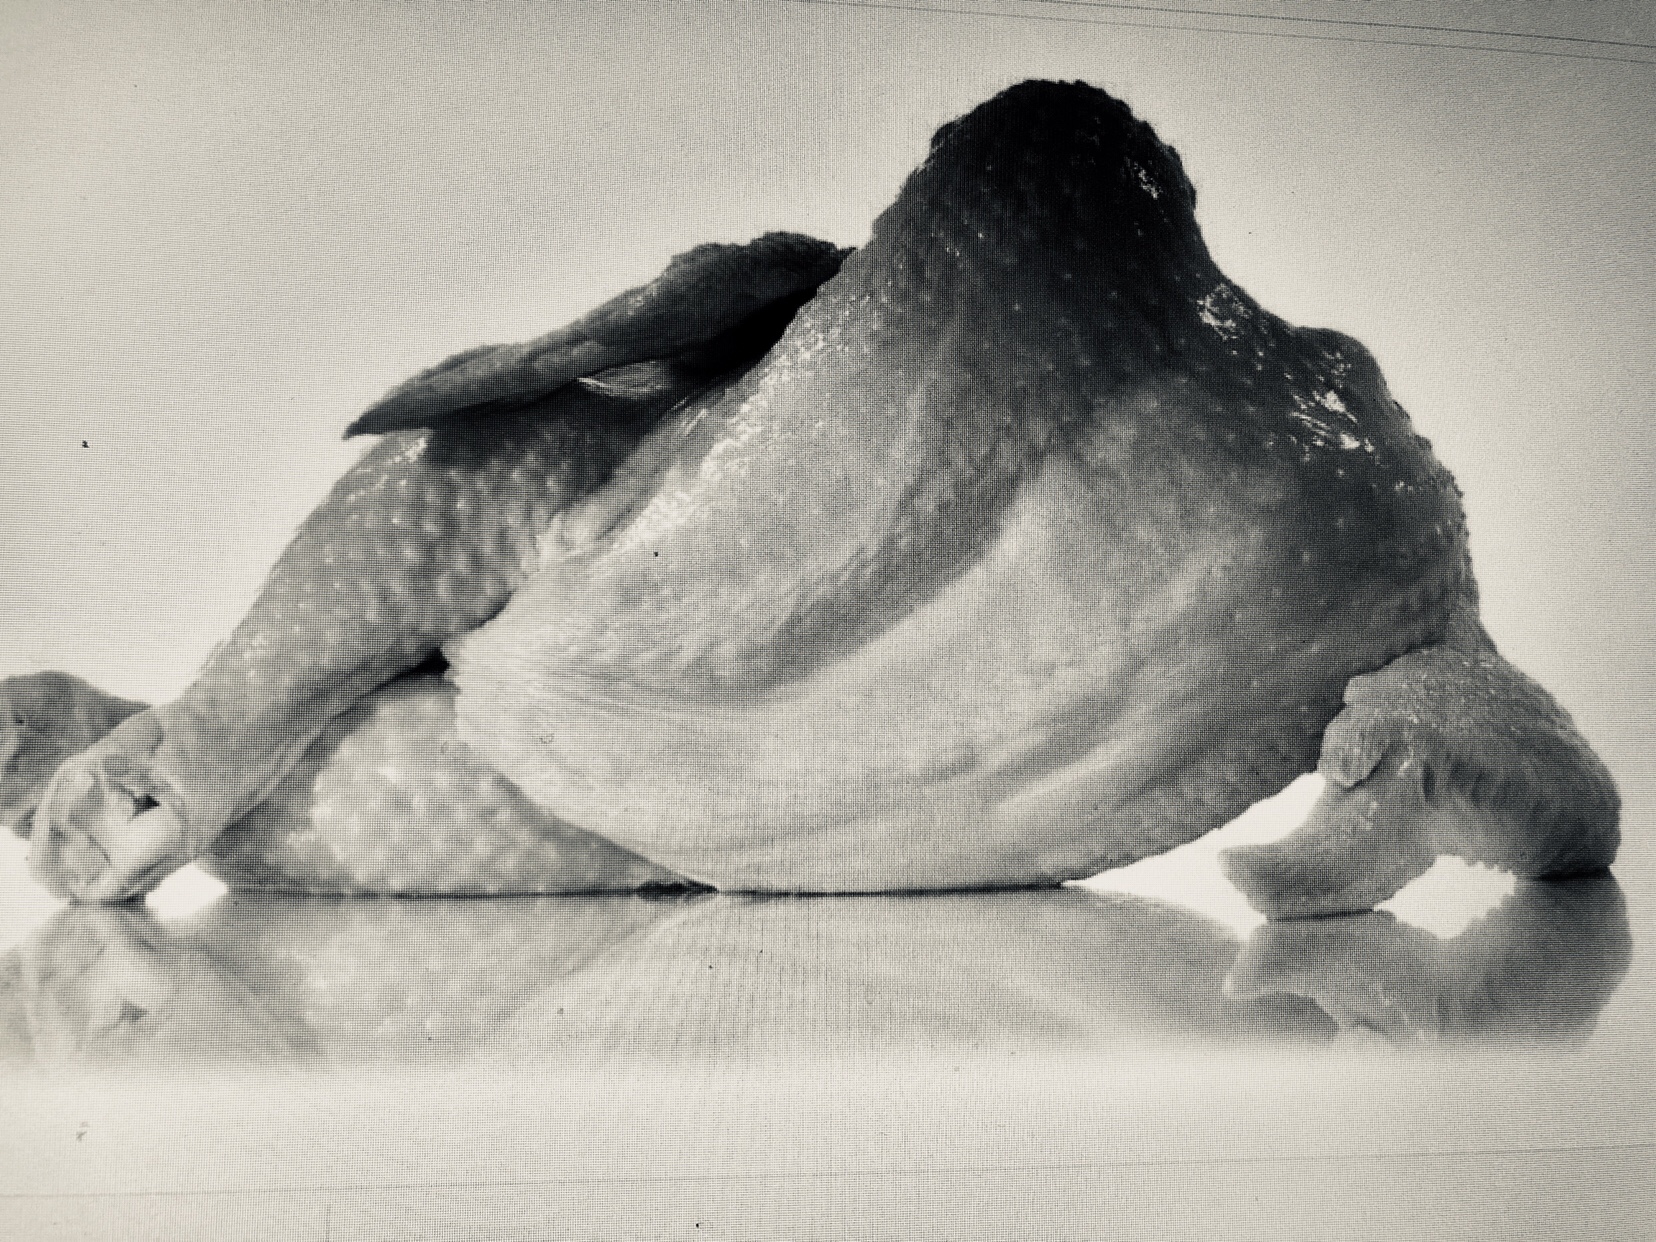 A Black and white photo of a plucked chicken reclining on its side with its legs crossed seductively